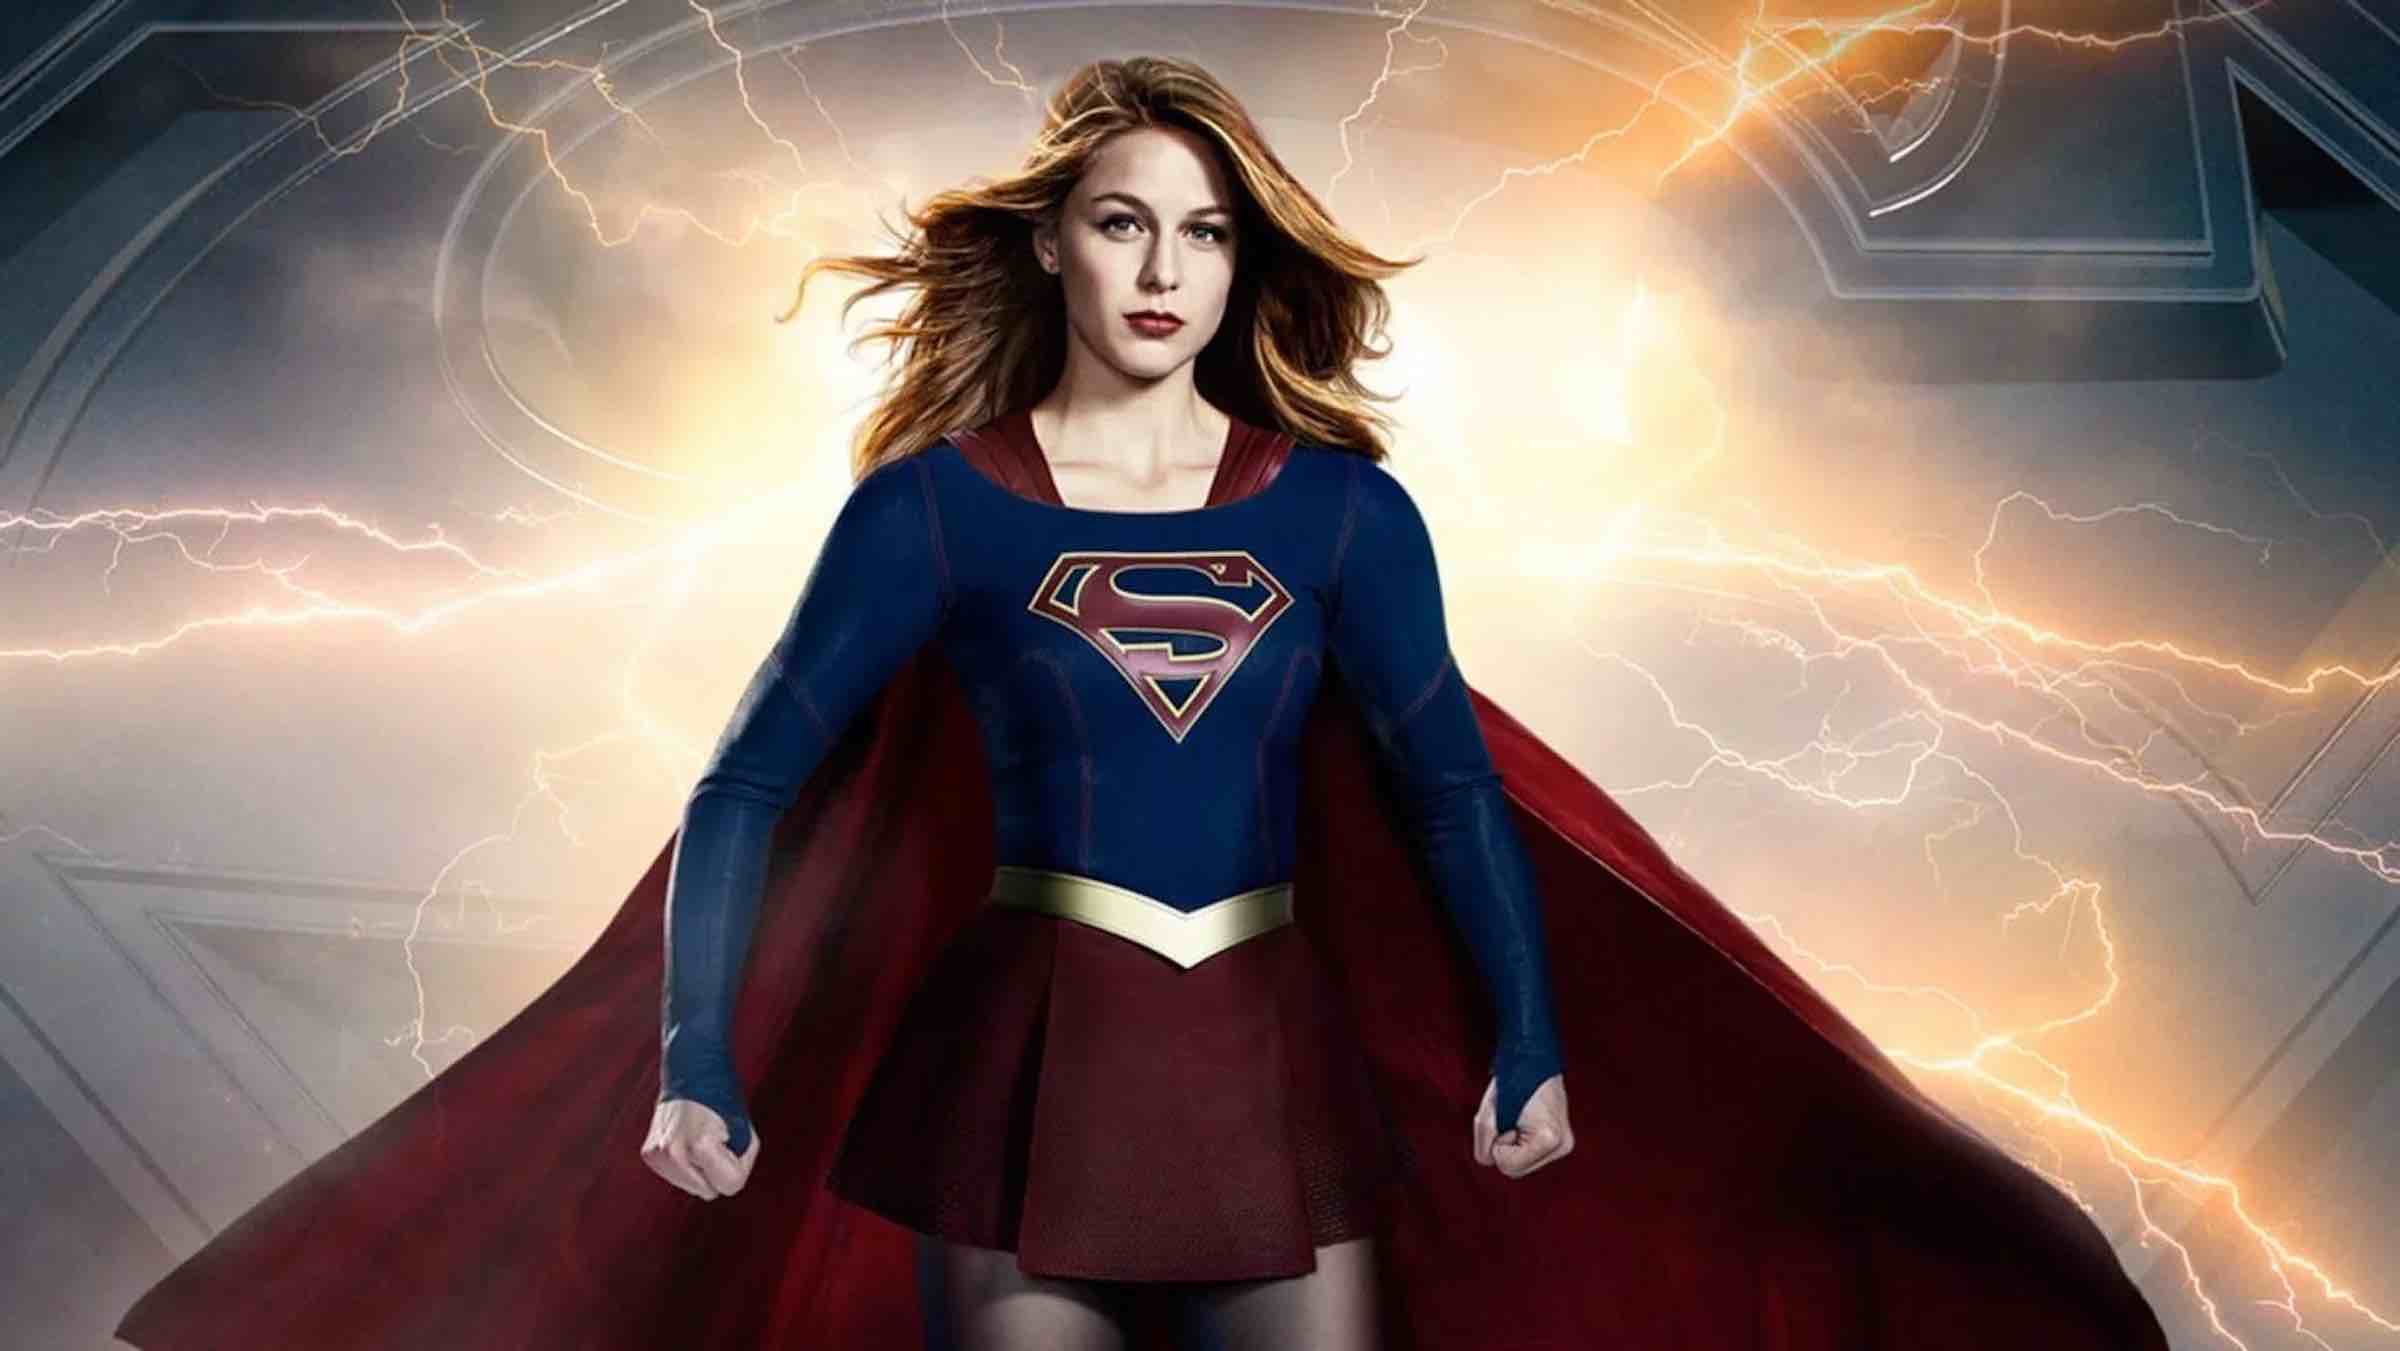 The newest episode of 'Crisis on Infinite Earths' will directly affect Season 5 of 'Supergirl'. Here are our theories on the next season of 'Supergirl'.